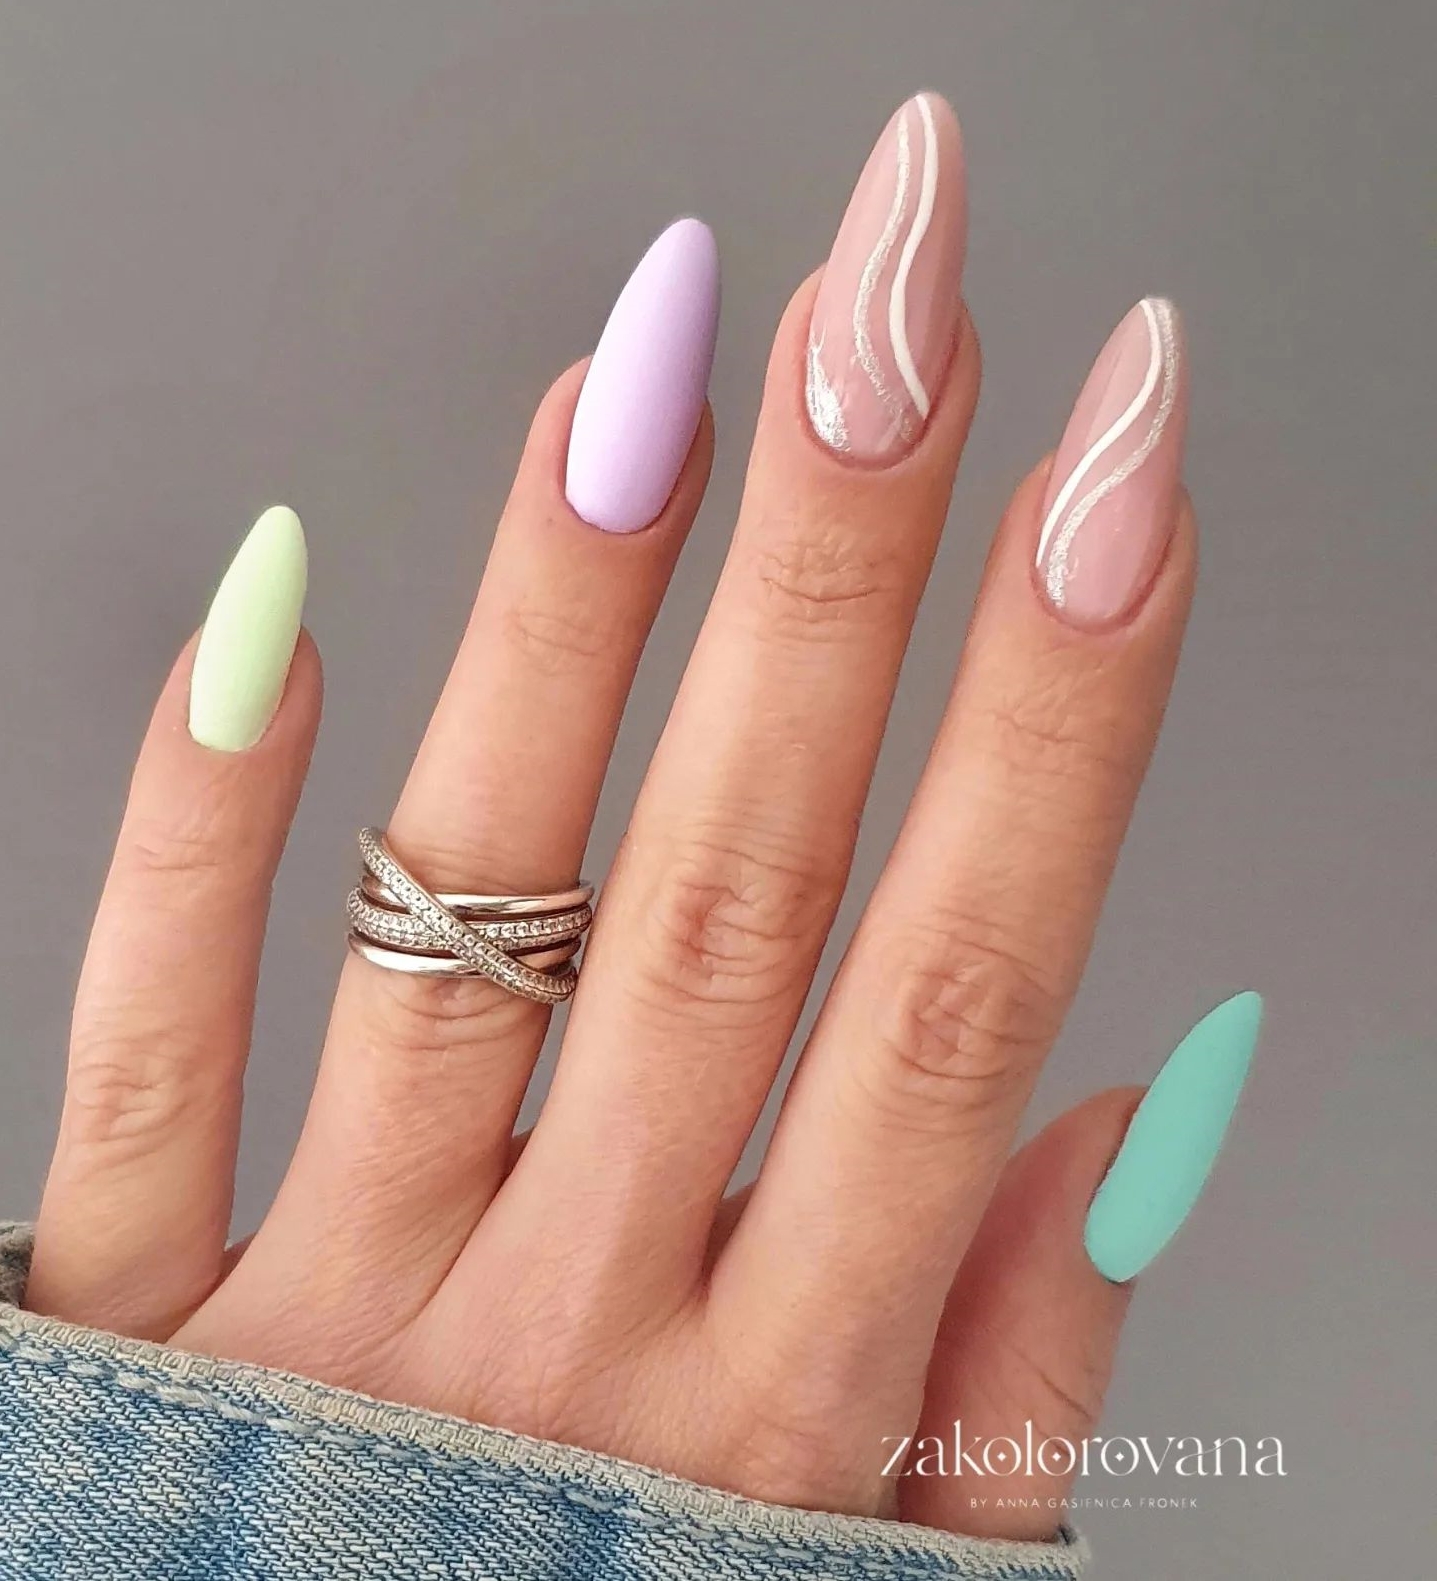 Long Pastel Nails with Swirls